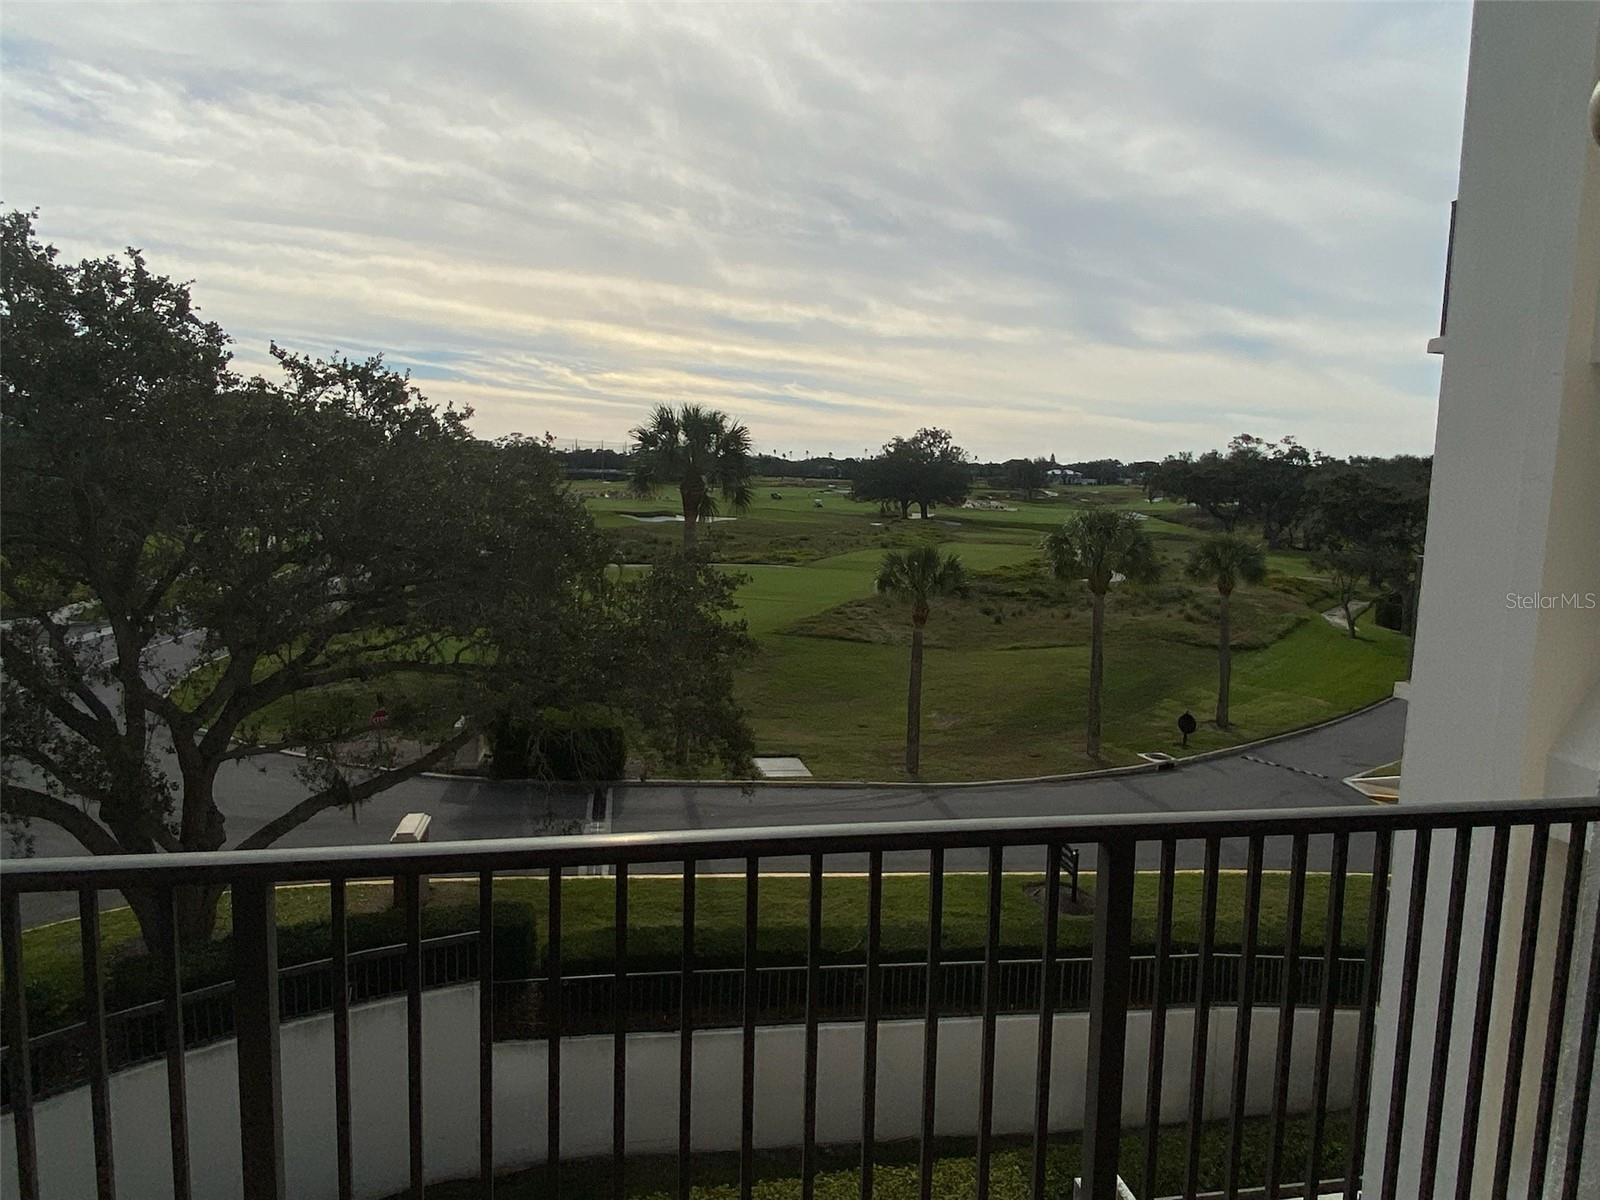 View of golf course from balcony